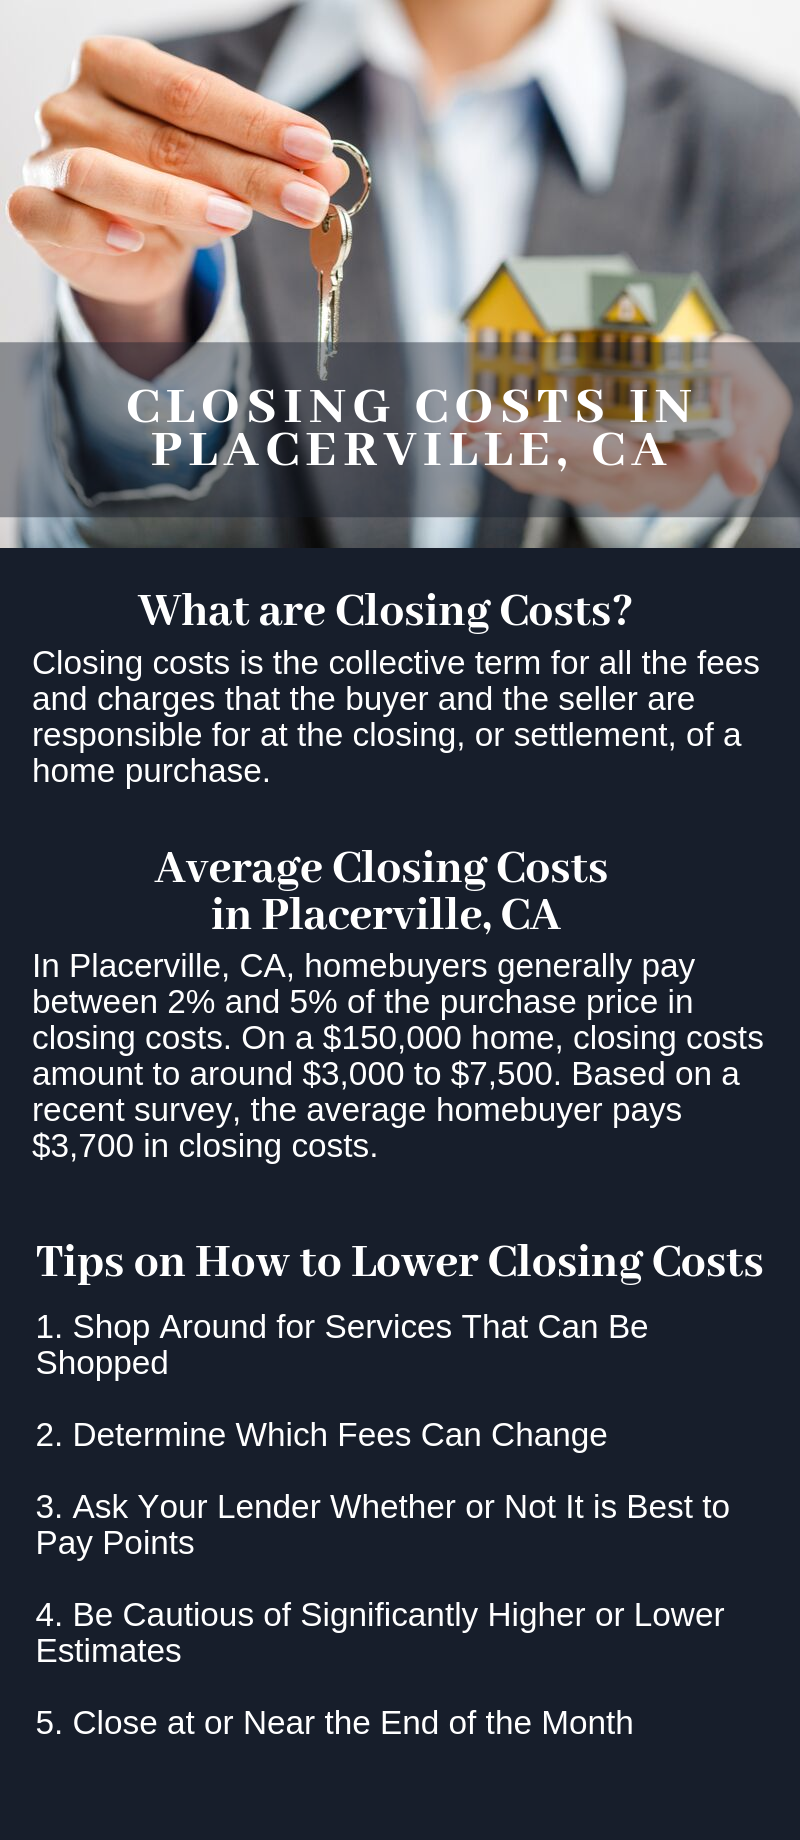 Infographic Showing the Closing Costs in Placerville, CA